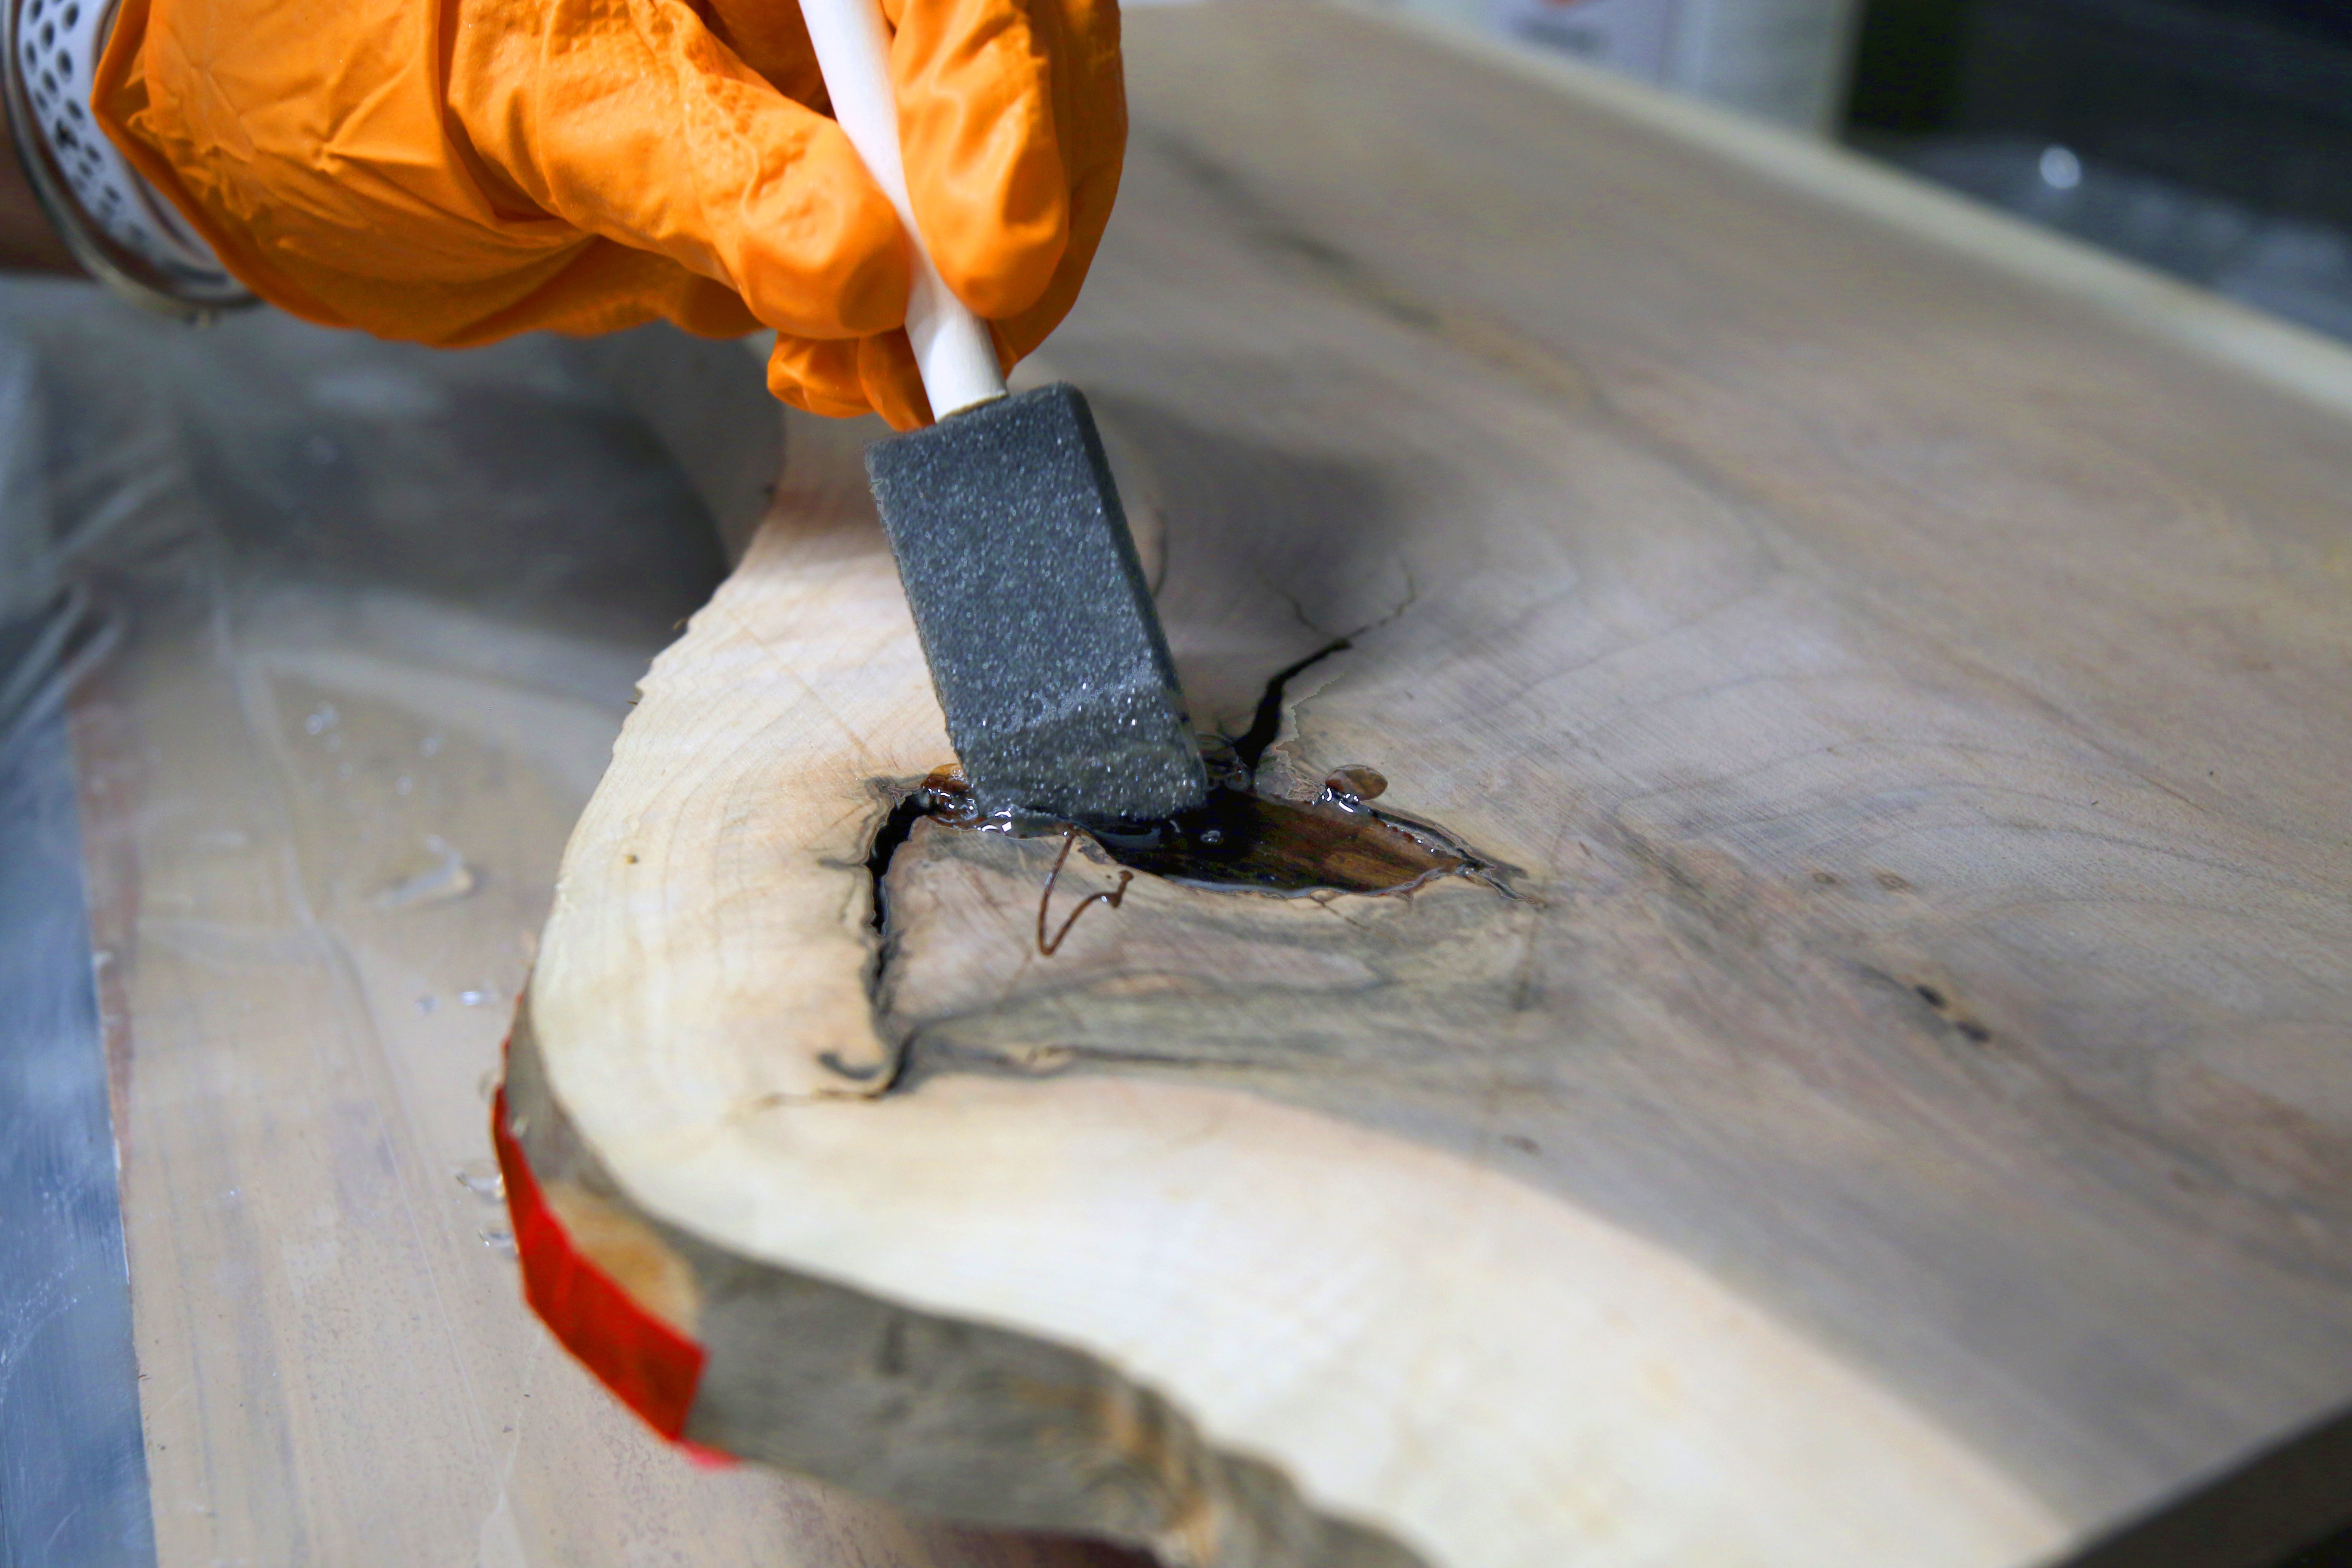 How To Fix Wood Holes & Cracks With Epoxy Resin In 4 Steps